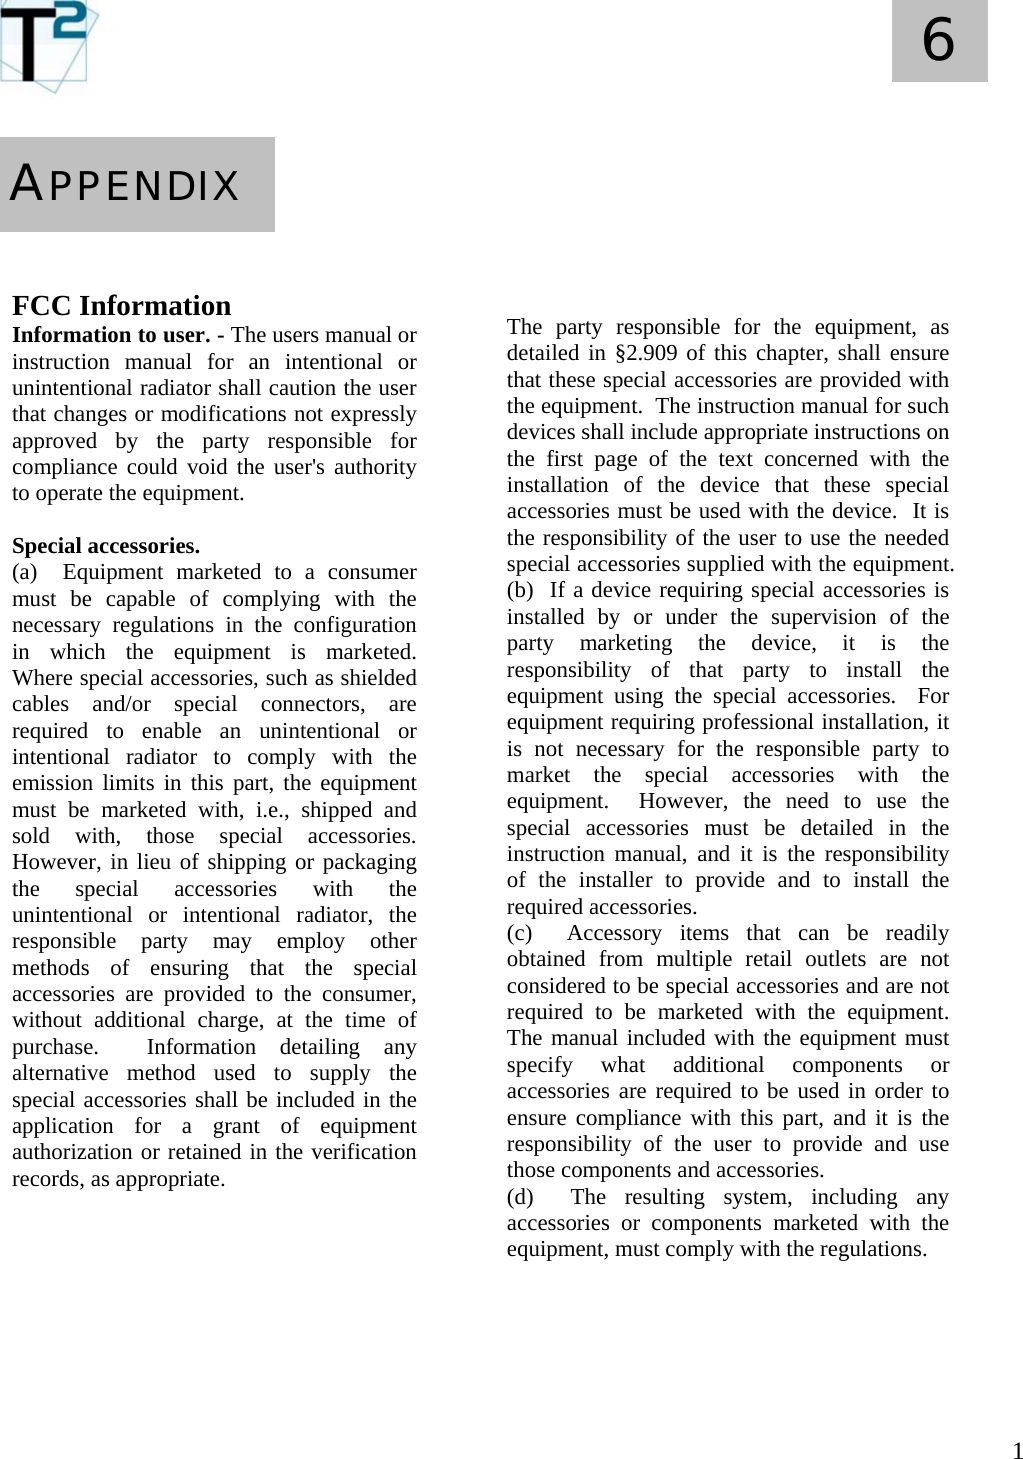   1 6       FCC Information Information to user. - The users manual or instruction manual for an intentional or unintentional radiator shall caution the user that changes or modifications not expressly approved by the party responsible for compliance could void the user&apos;s authority to operate the equipment.  Special accessories.  (a)  Equipment marketed to a consumer must be capable of complying with the necessary regulations in the configuration in which the equipment is marketed.  Where special accessories, such as shielded cables and/or special connectors, are required to enable an unintentional or intentional radiator to comply with the emission limits in this part, the equipment must be marketed with, i.e., shipped and sold with, those special accessories.  However, in lieu of shipping or packaging the special accessories with the unintentional or intentional radiator, the responsible party may employ other methods of ensuring that the special accessories are provided to the consumer, without additional charge, at the time of purchase.  Information detailing any alternative method used to supply the special accessories shall be included in the application for a grant of equipment  authorization or retained in the verification records, as appropriate.            APPENDIX       The party responsible for the equipment, as detailed in §2.909 of this chapter, shall ensure that these special accessories are provided with the equipment.  The instruction manual for such devices shall include appropriate instructions on the first page of the text concerned with the installation of the device that these special accessories must be used with the device.  It is the responsibility of the user to use the needed special accessories supplied with the equipment. (b)  If a device requiring special accessories is installed by or under the supervision of the party marketing the device, it is the responsibility of that party to install the equipment using the special accessories.  For equipment requiring professional installation, it is not necessary for the responsible party to market the special accessories with the equipment.  However, the need to use the special accessories must be detailed in the instruction manual, and it is the responsibility of the installer to provide and to install the required accessories. (c)  Accessory items that can be readily obtained from multiple retail outlets are not considered to be special accessories and are not required to be marketed with the equipment.  The manual included with the equipment must specify what additional components or accessories are required to be used in order to ensure compliance with this part, and it is the responsibility of the user to provide and use those components and accessories. (d)  The resulting system, including any accessories or components marketed with the equipment, must comply with the regulations.     